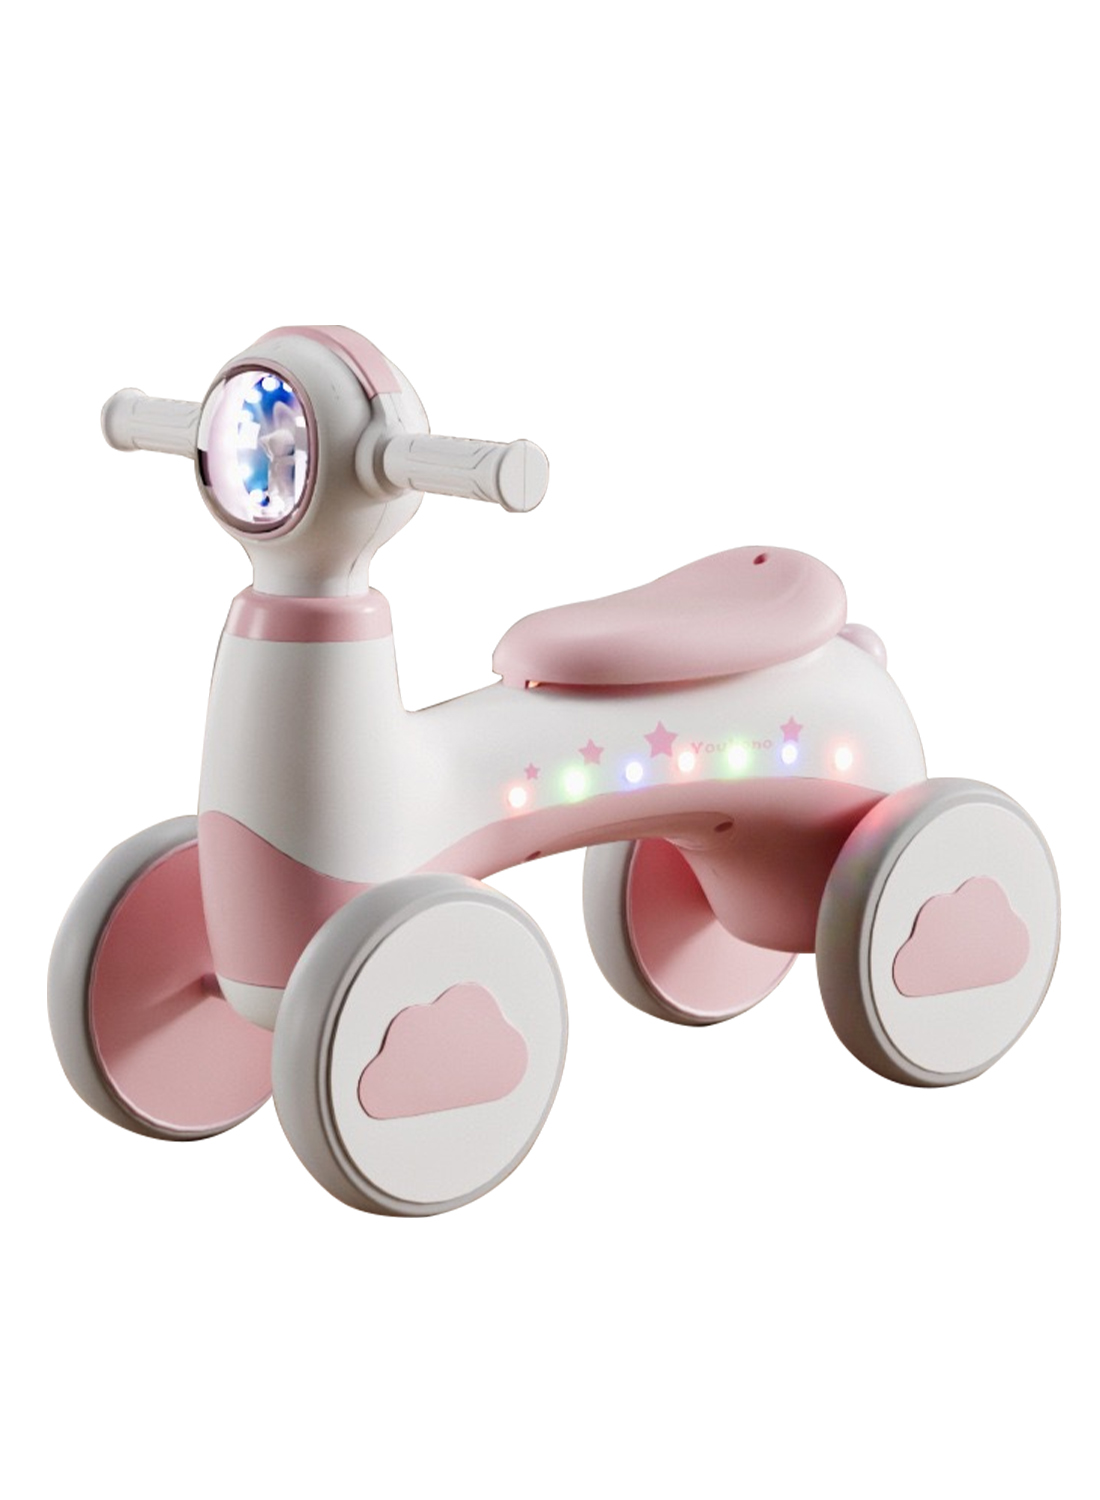 Children's Scooter Four Wheel Balance Toy Car Toddler 135° Rotatable Handlebars, and Smooth EVA Tires for Safe and Comfortable Riding